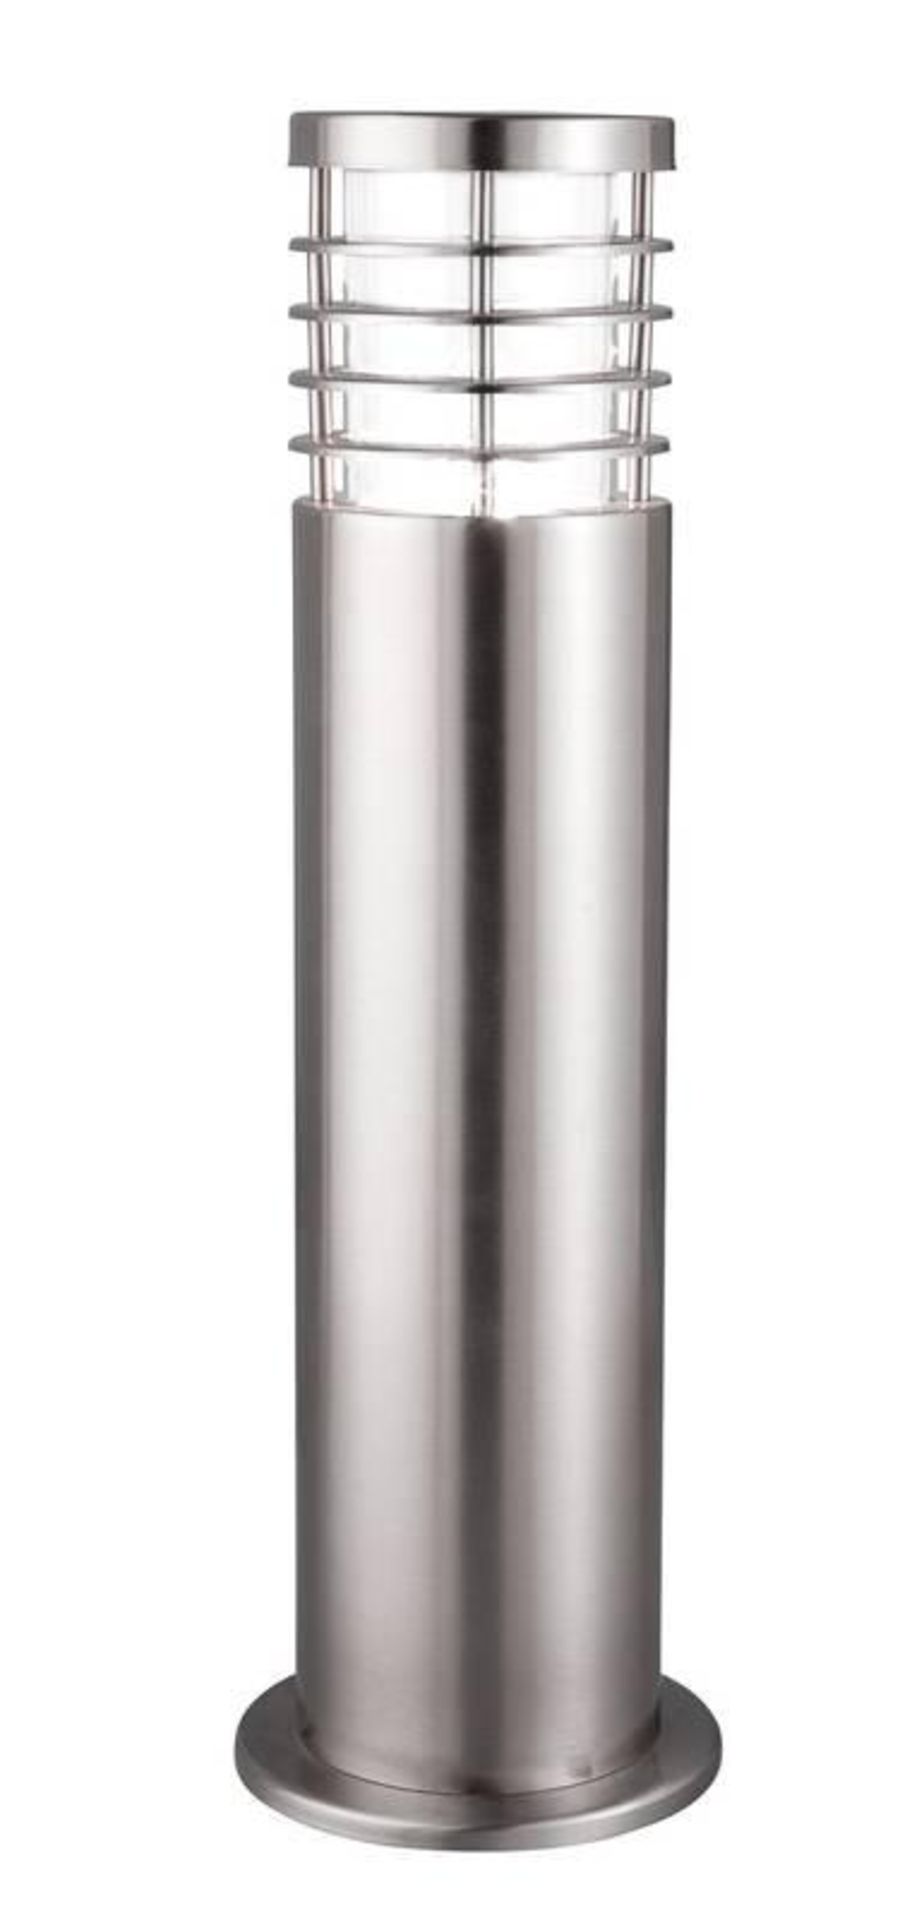 1 x Satin Silver Outdoor Stainless Steel Bollard Light With Polycarbonate Diffuser - IP44 Rated - 45 - Image 2 of 2